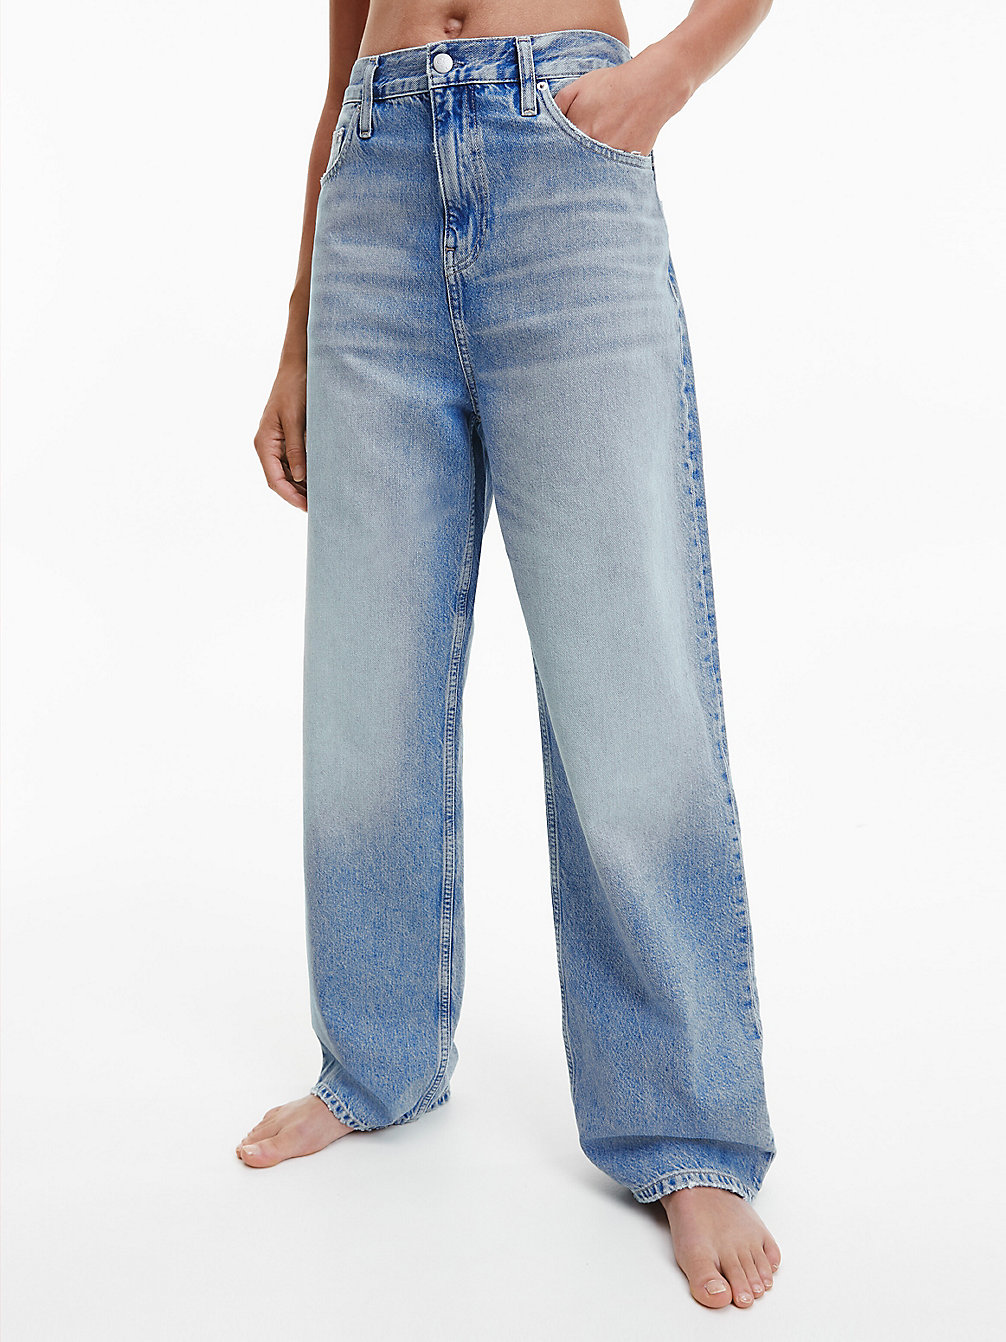 High Rise Relaxed Jeans > DENIM LIGHT > undefined donna > Calvin Klein